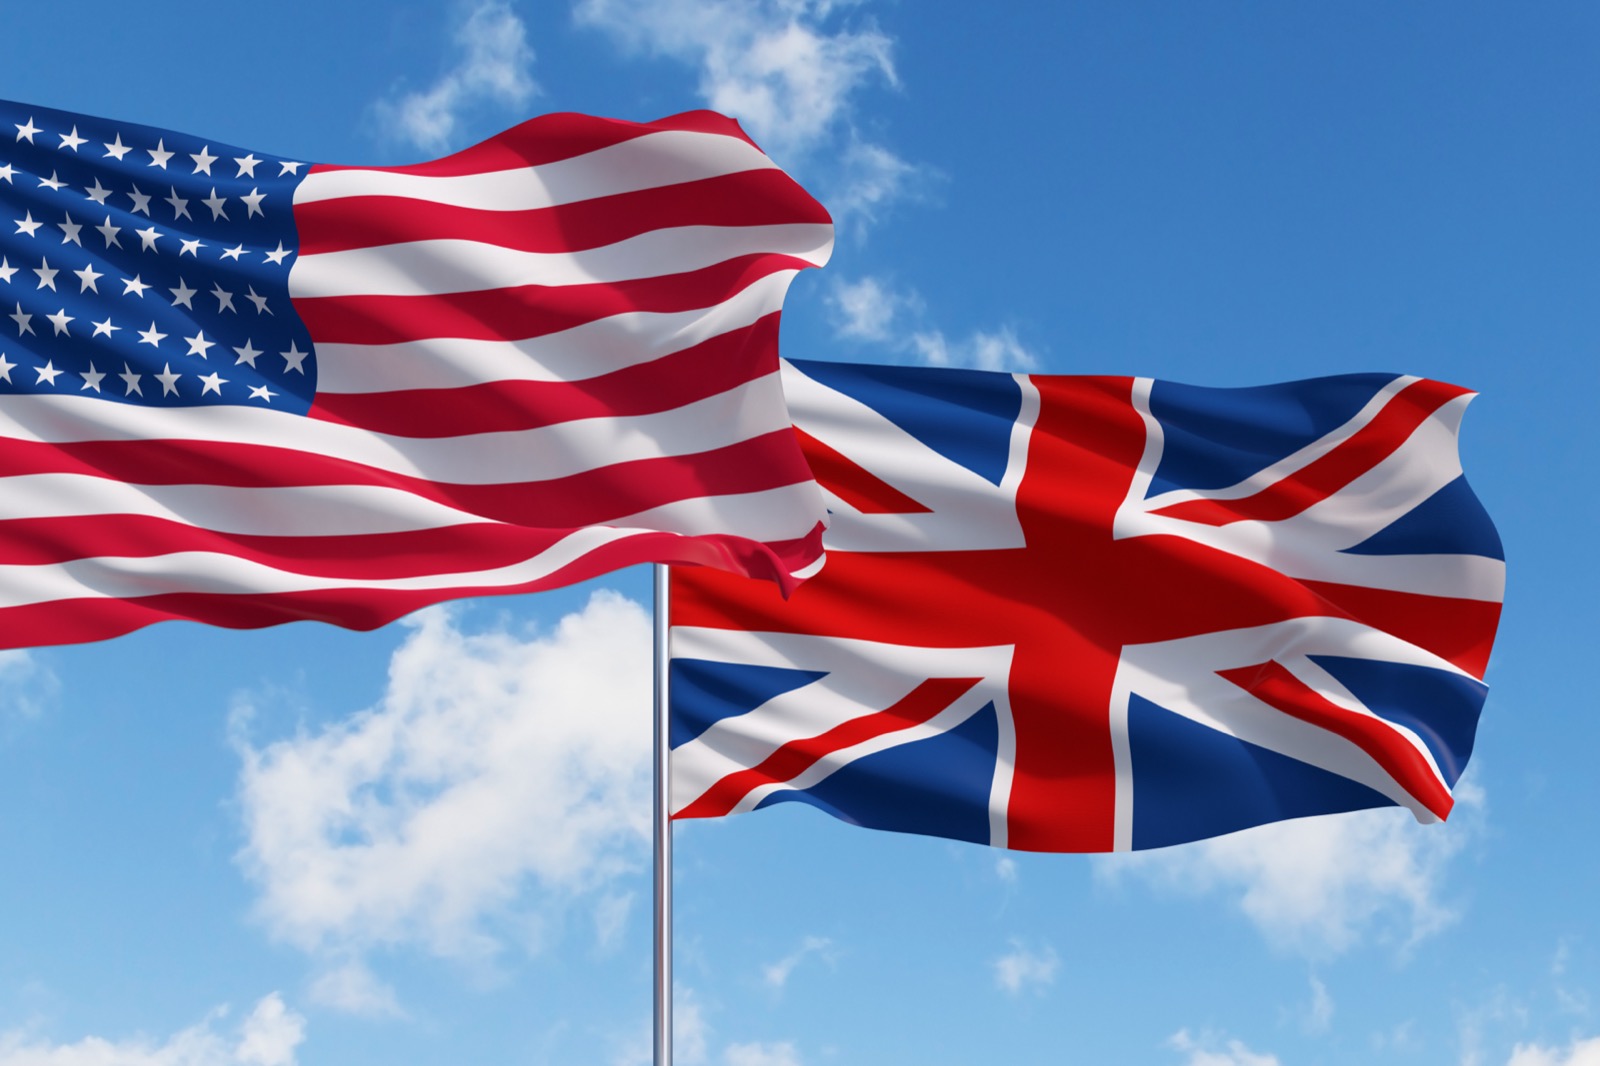 United States flag and United Kingdom flag blowing in the wind together.